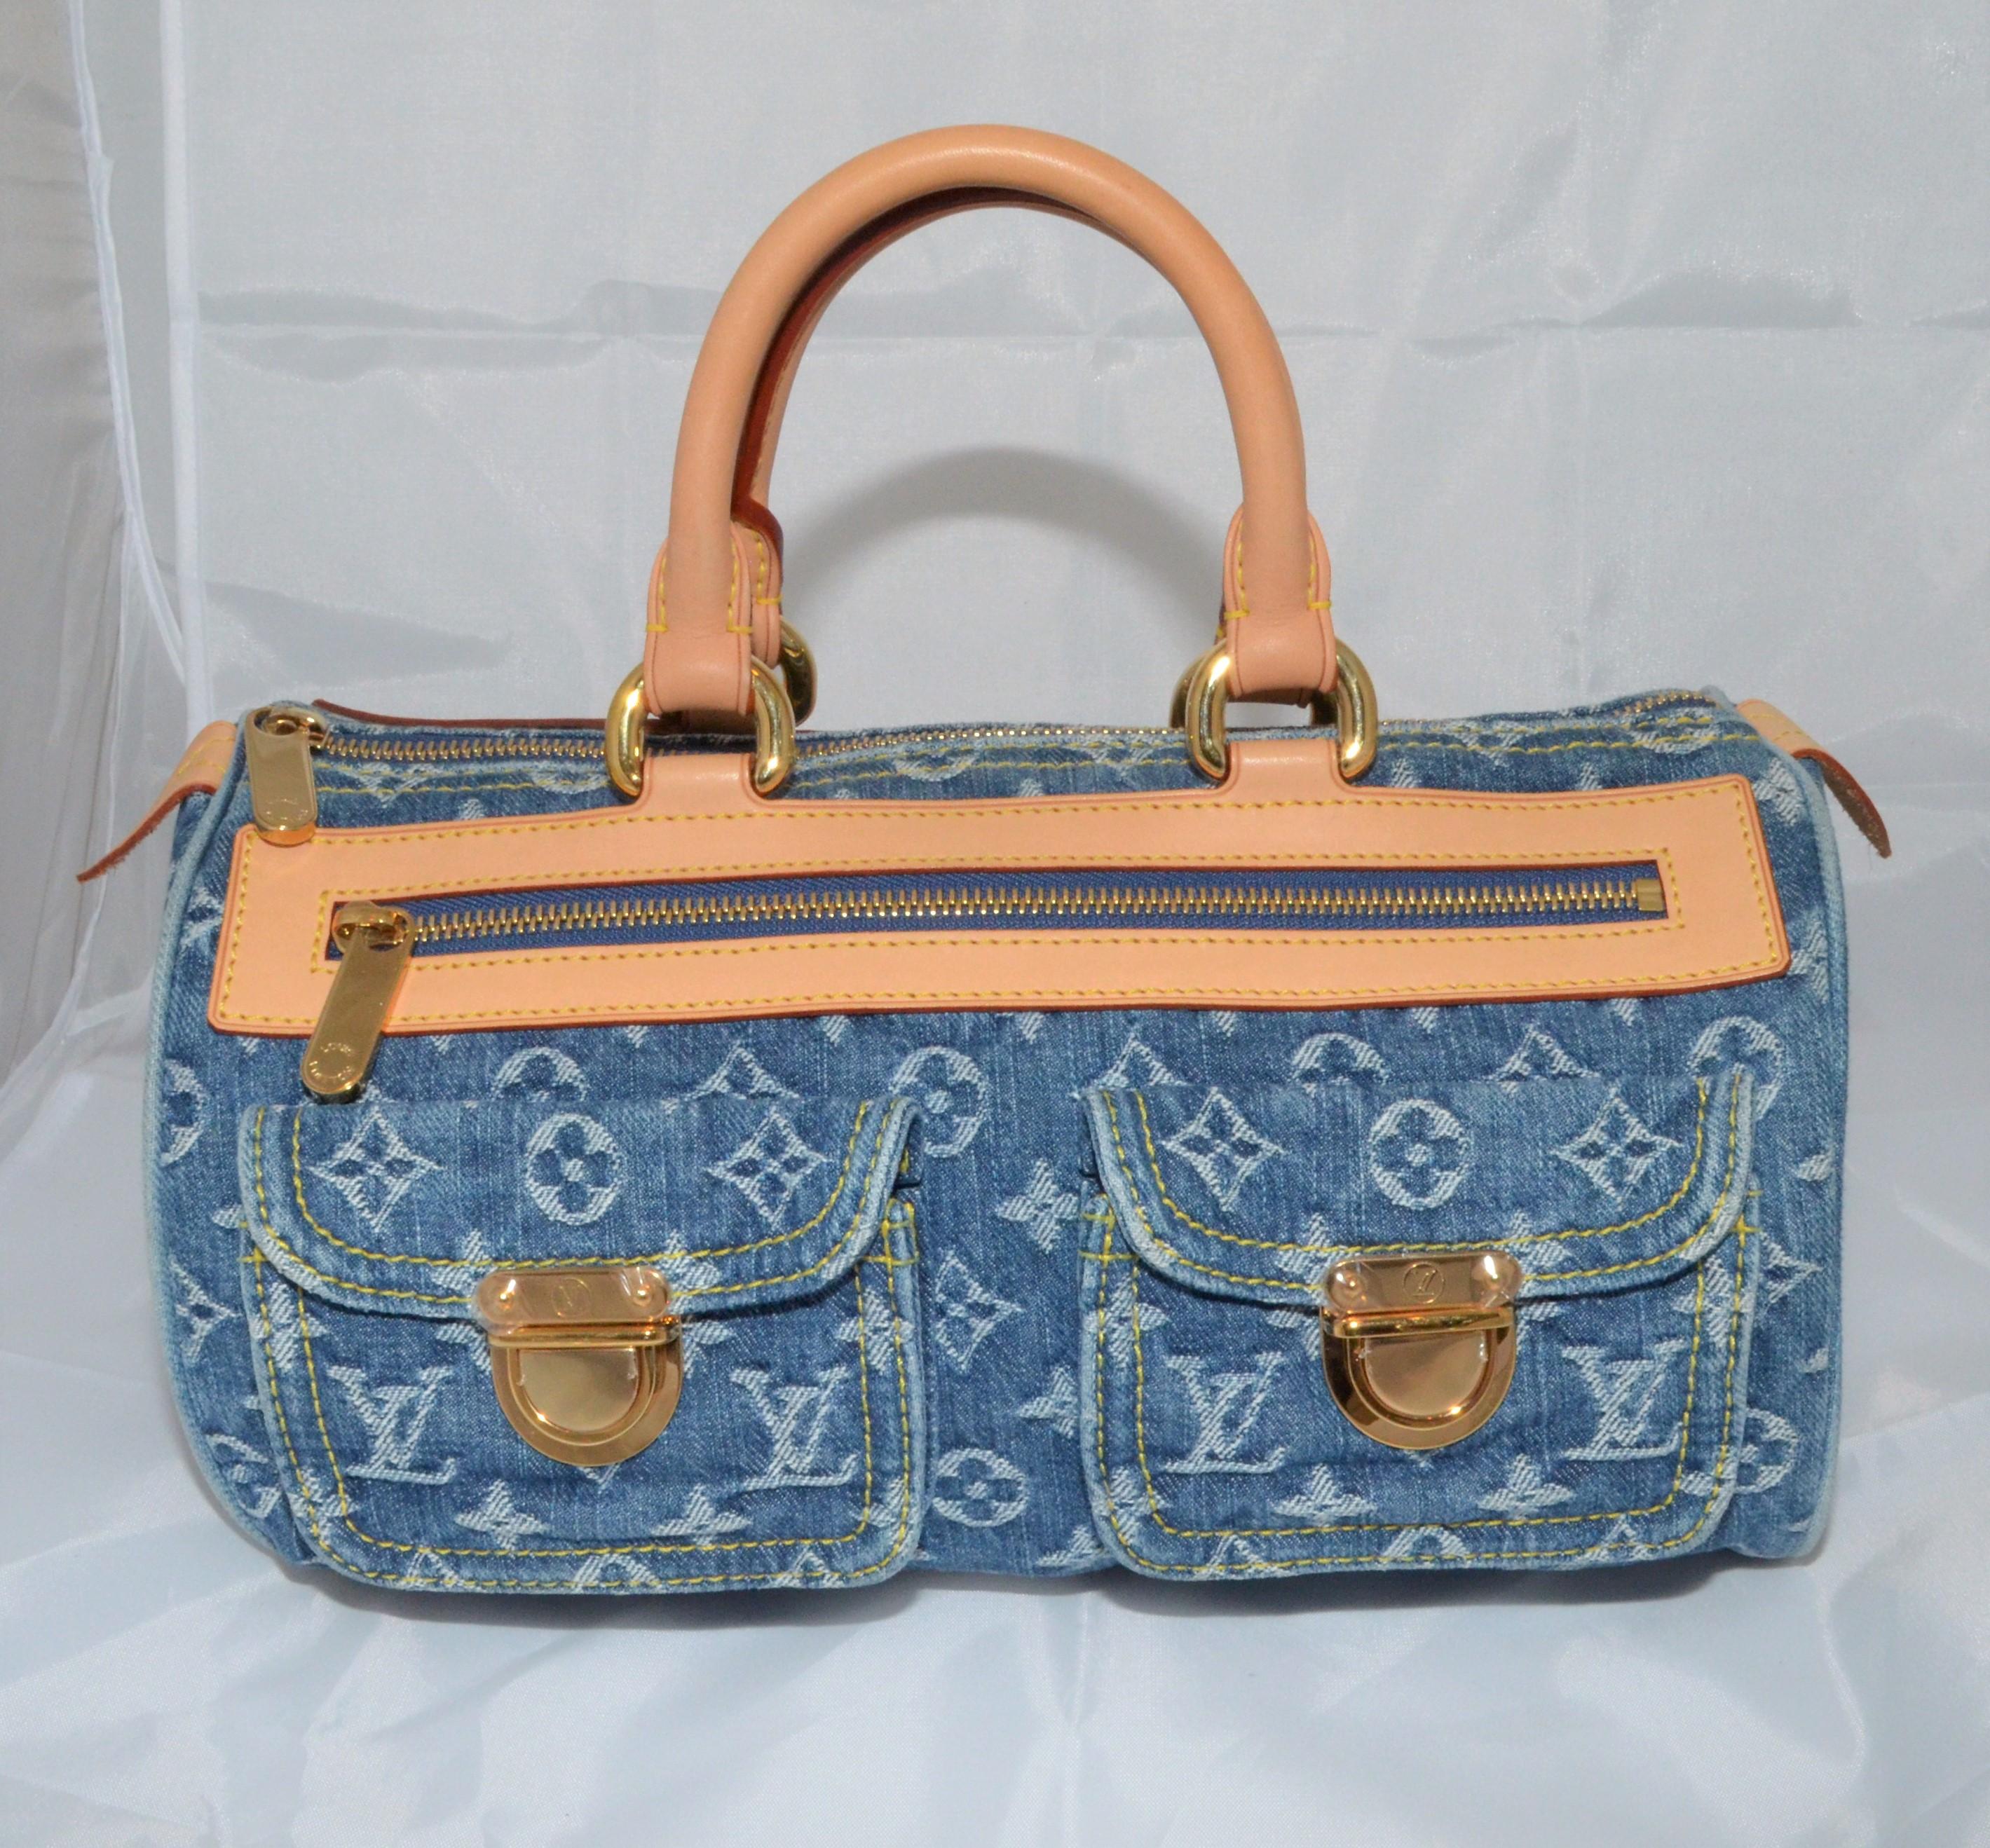 Louis Vuitton handbag featured in blue denim with a signature monogram design, top leather handles, zipper fastening, and two functional flap pockets at the front. Gold-tone hardware throughout. Interior is fully lined in a mustard-yellow suede